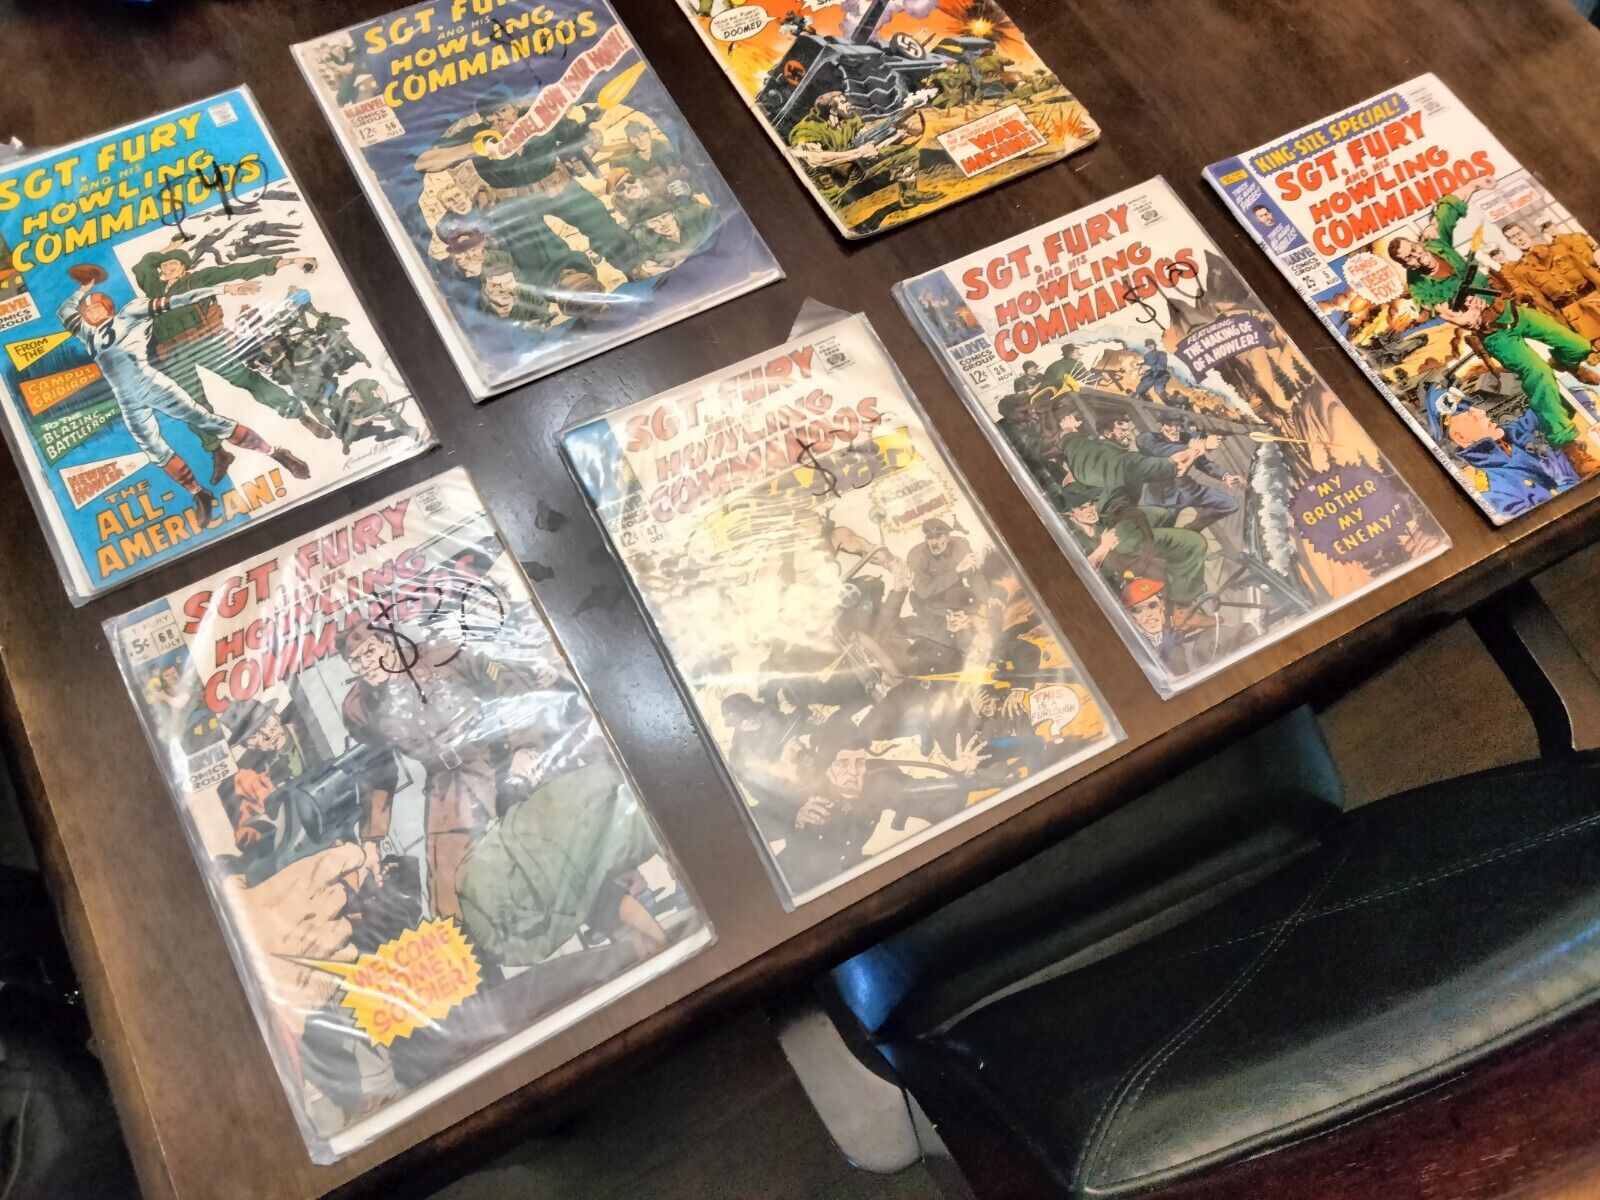 Sargent Fury And His Howling Commandos Comic Books